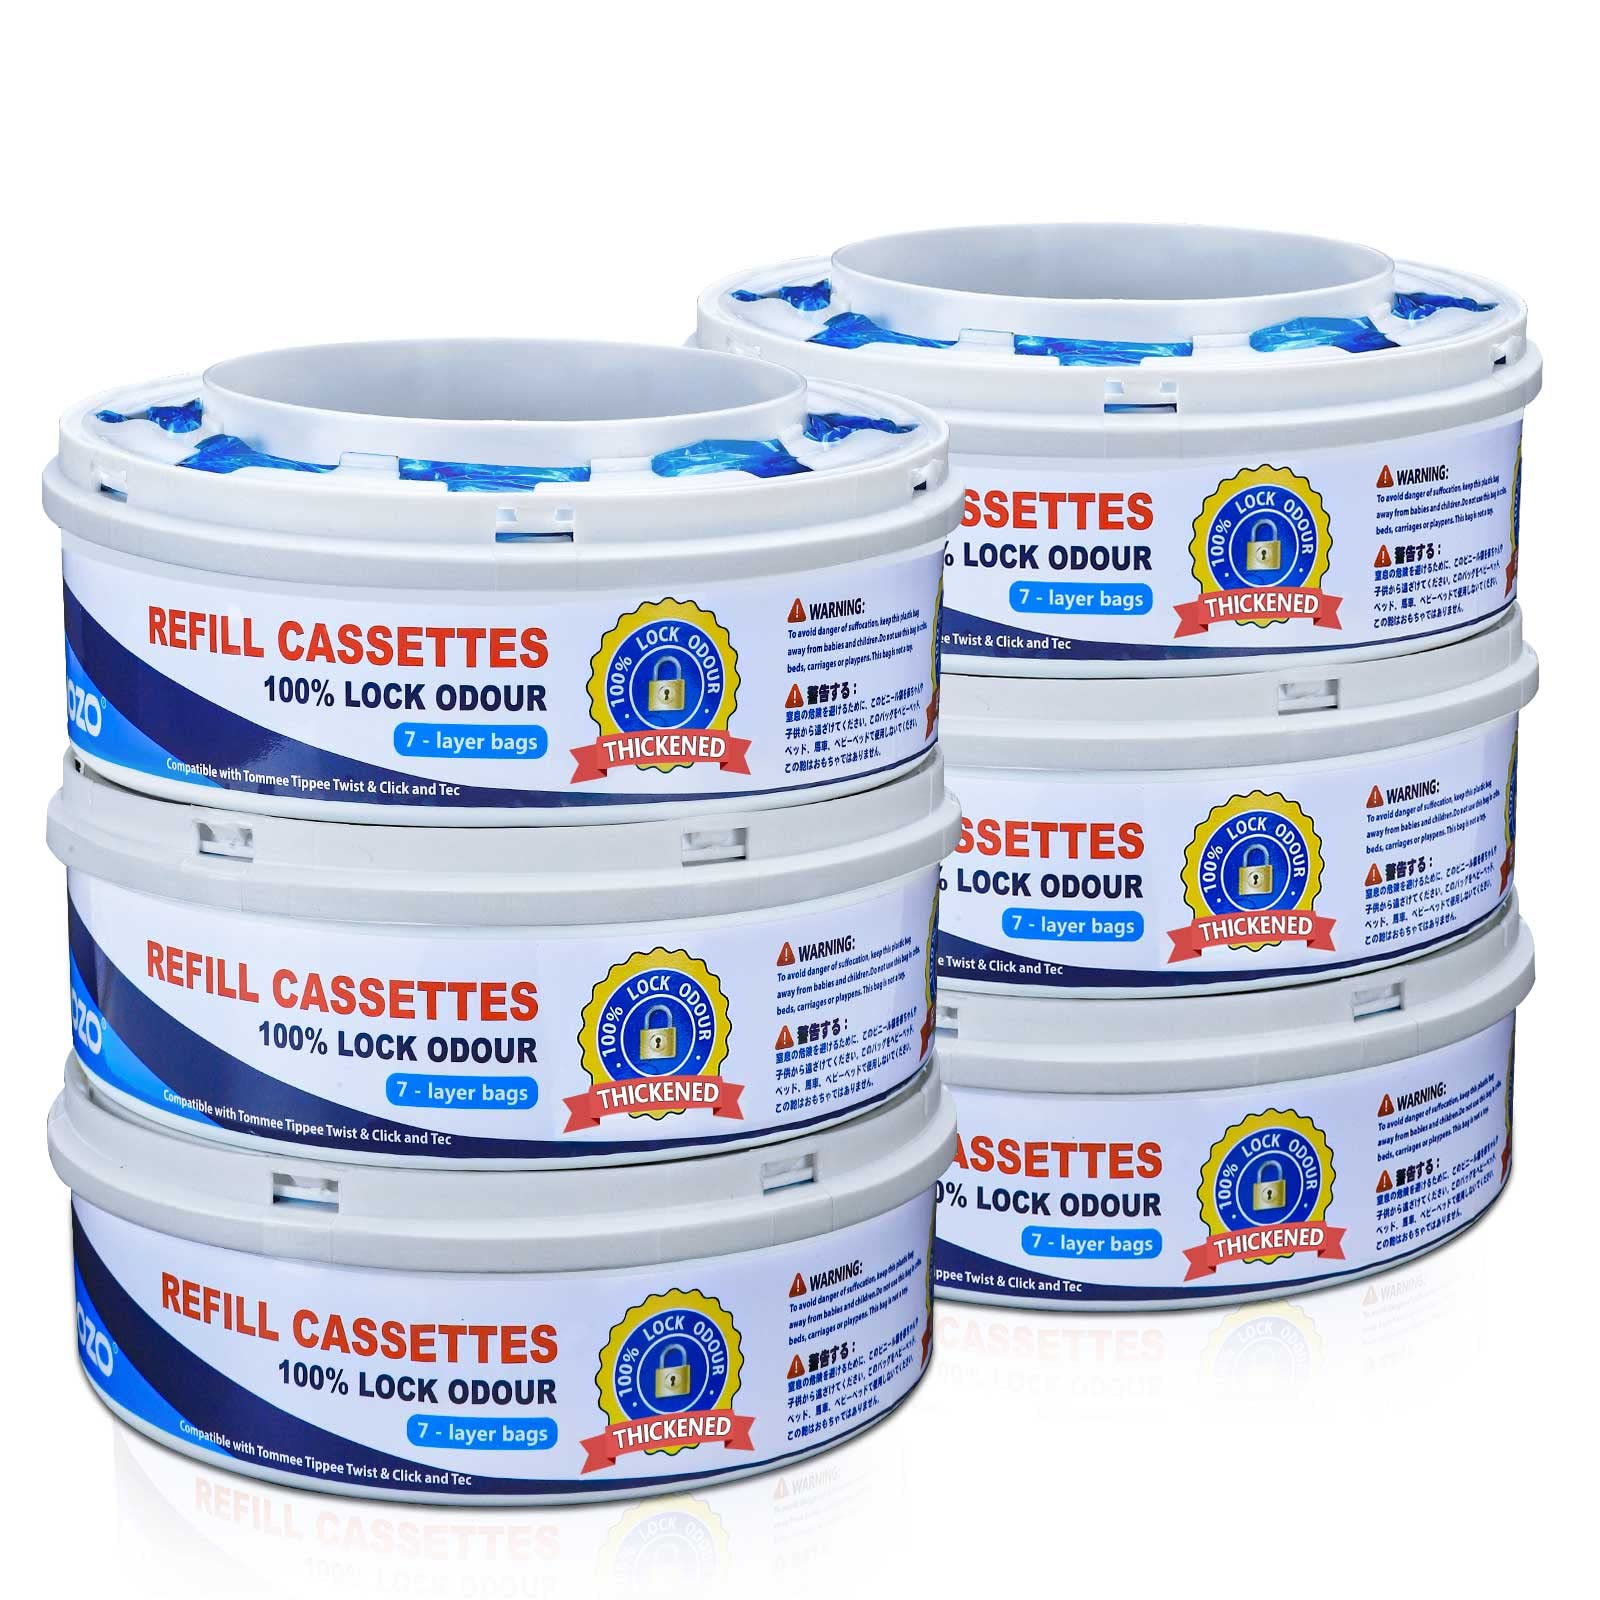 Nappy Bin Refill Cassettes 100% Seal Odor Compatible with Tommee Tippee Twist and Click 30% Thicker Bags 6 Pack